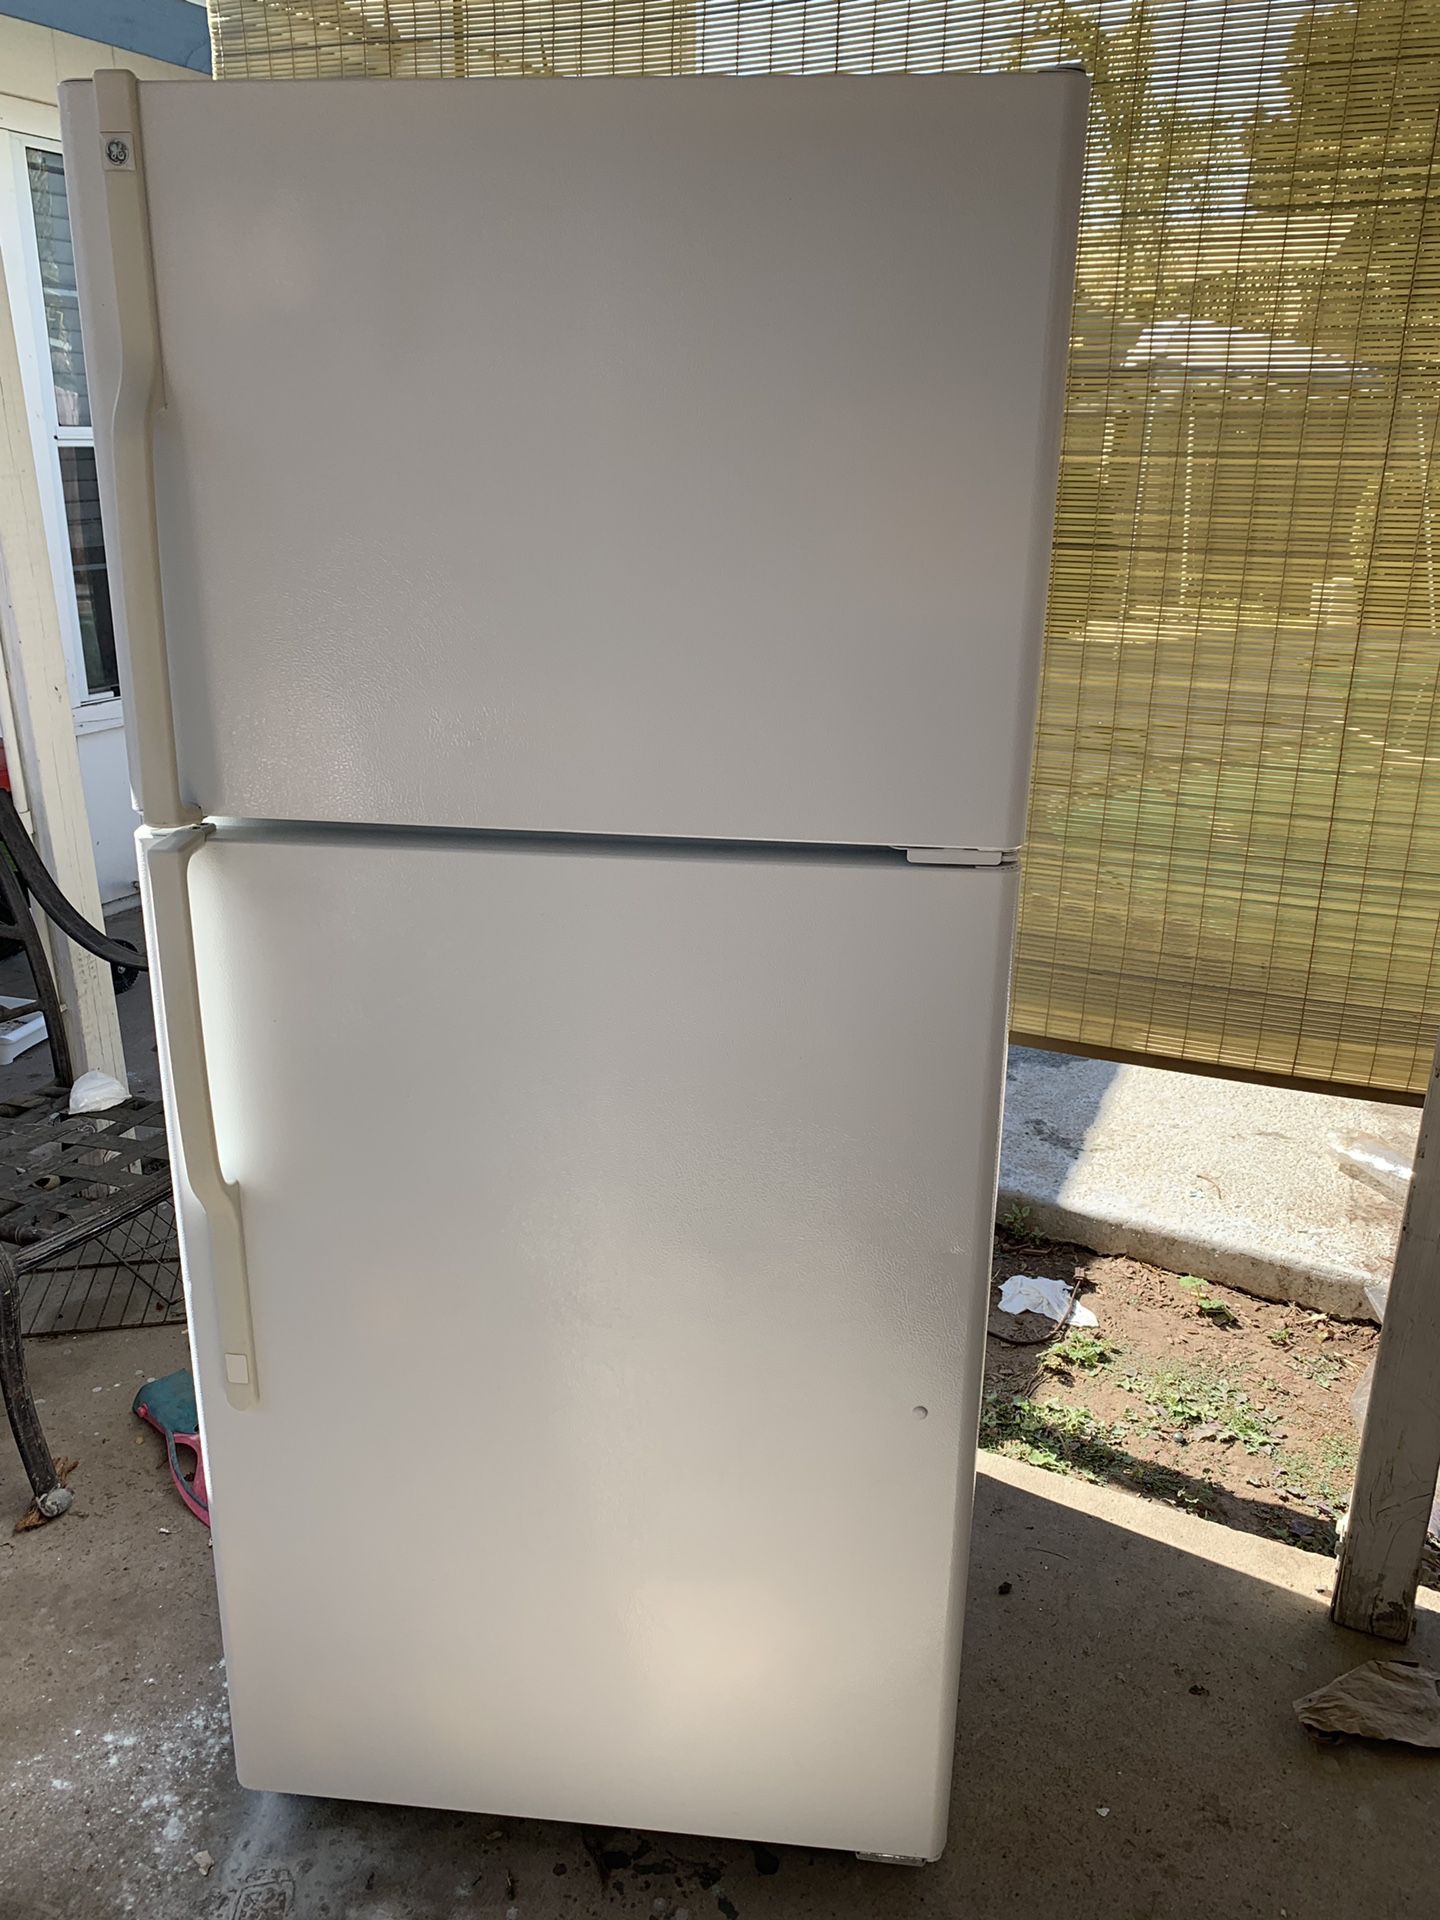 GE 18 cubic foot refrigerator EXECELLENT condition *free delivery*